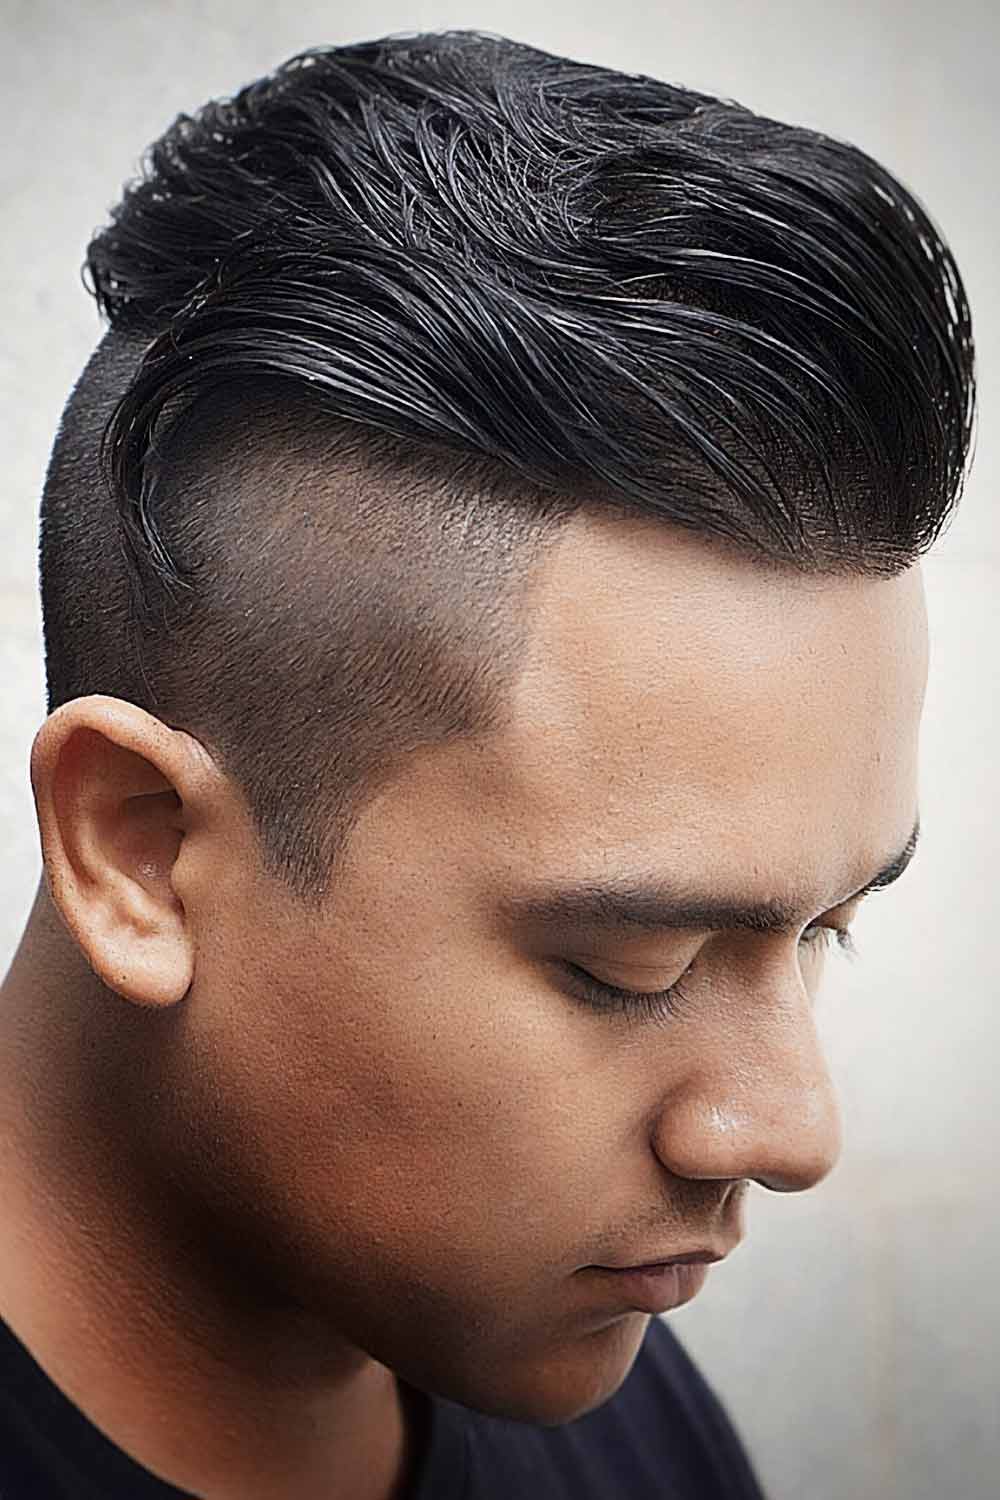 Undercut Haircut For Women: 5 Unique Looks To Stand Out